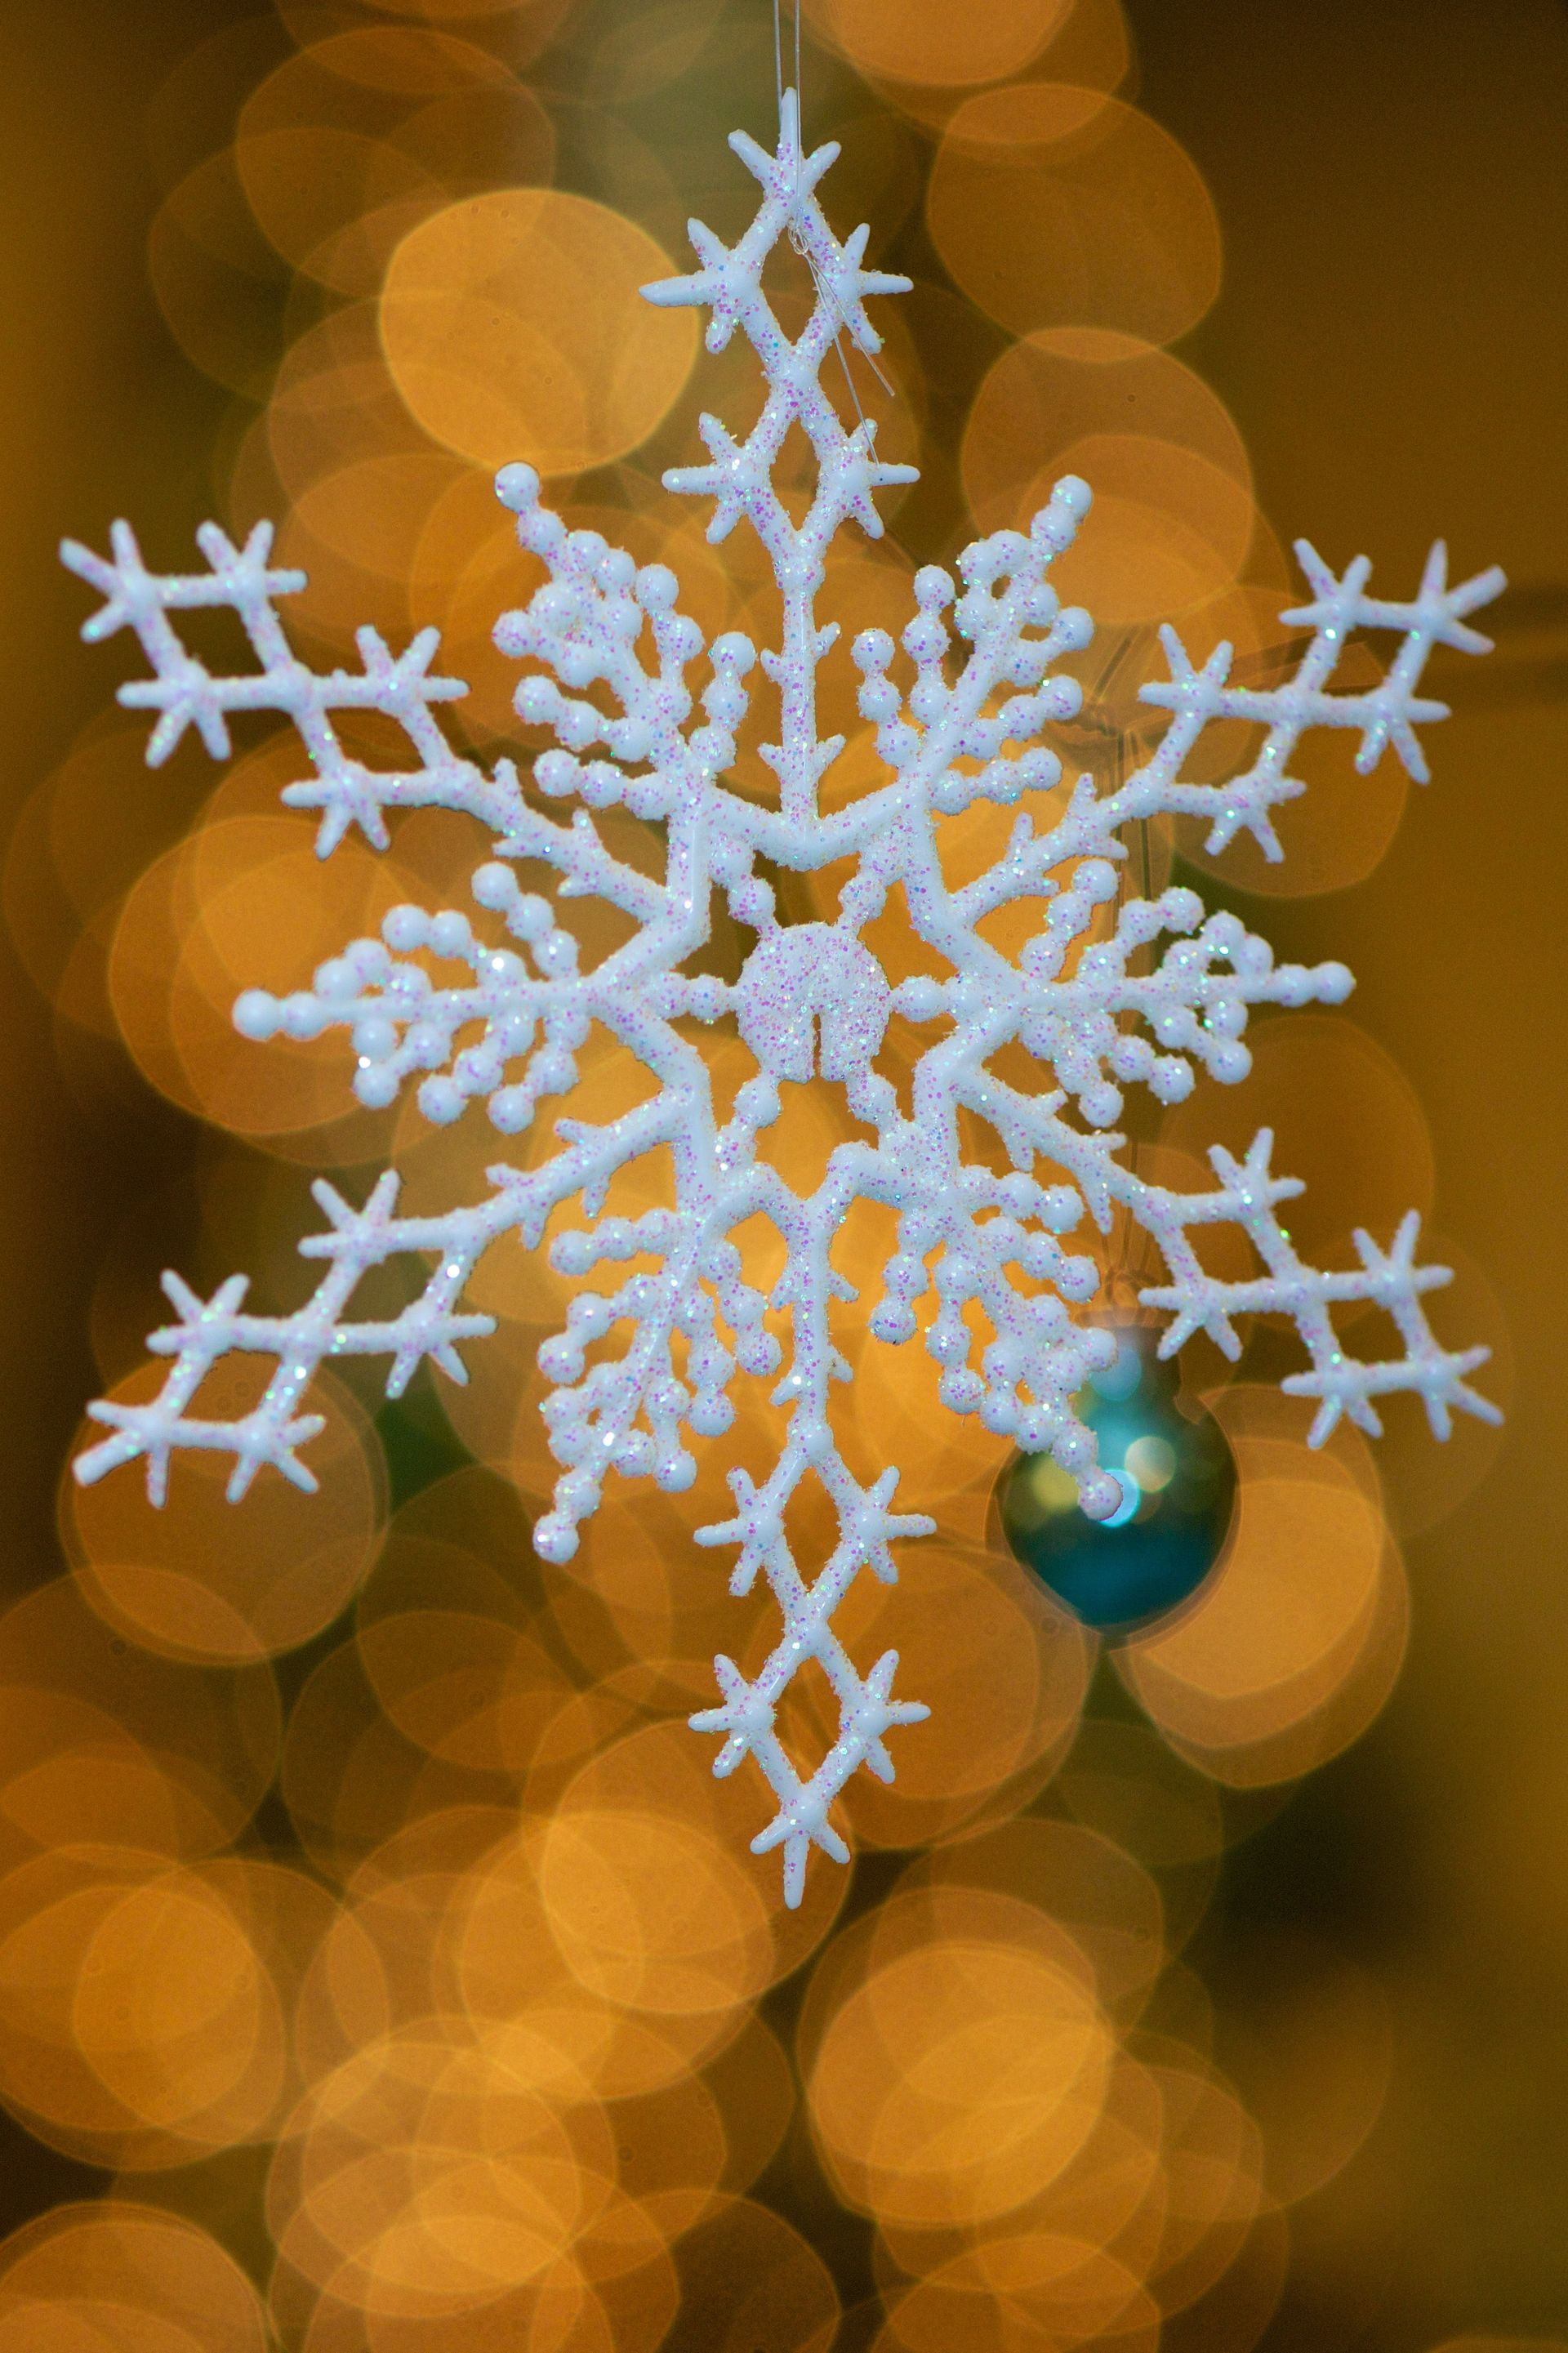 A Christmas tree ornament in the shape of a snowflake.